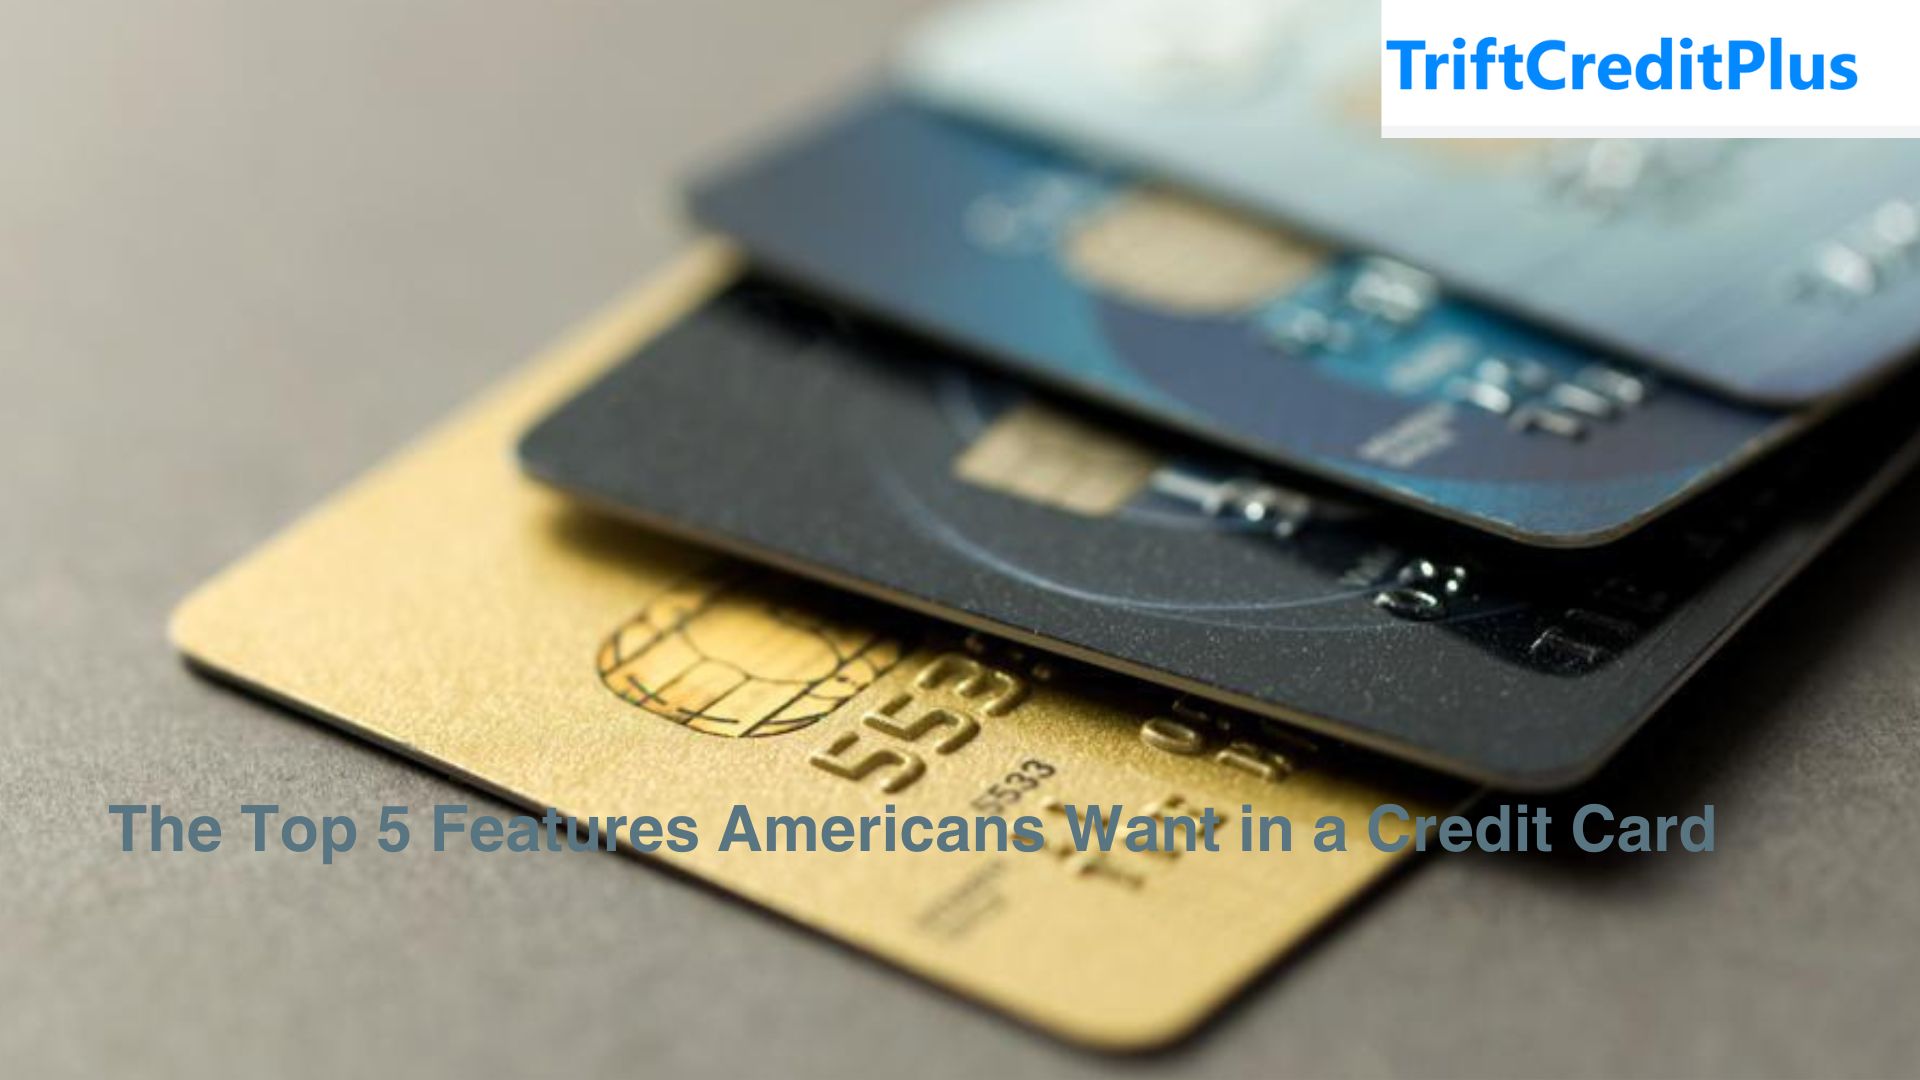 The Top 5 Features Americans Want in a Credit Card